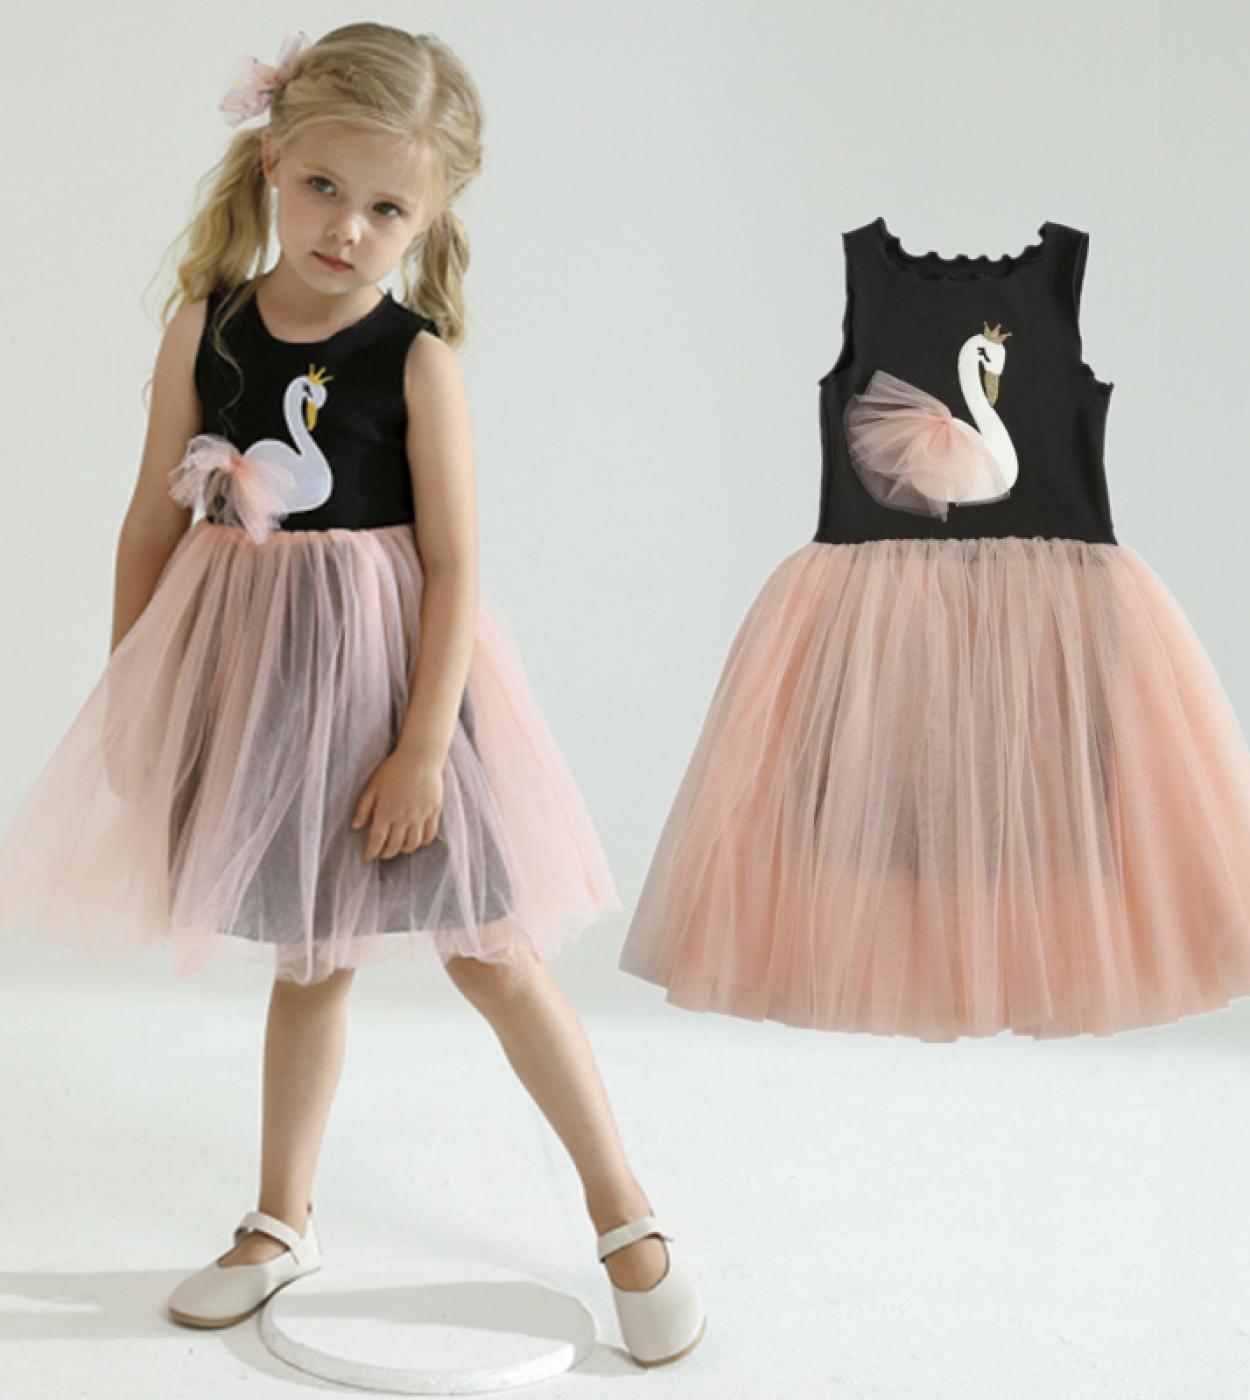 Summer Kids Casual Dress Applique Swan Tutu Dresses Evening Party Wear For Little Girl Lace Skeeveless Clothing For 3 8t